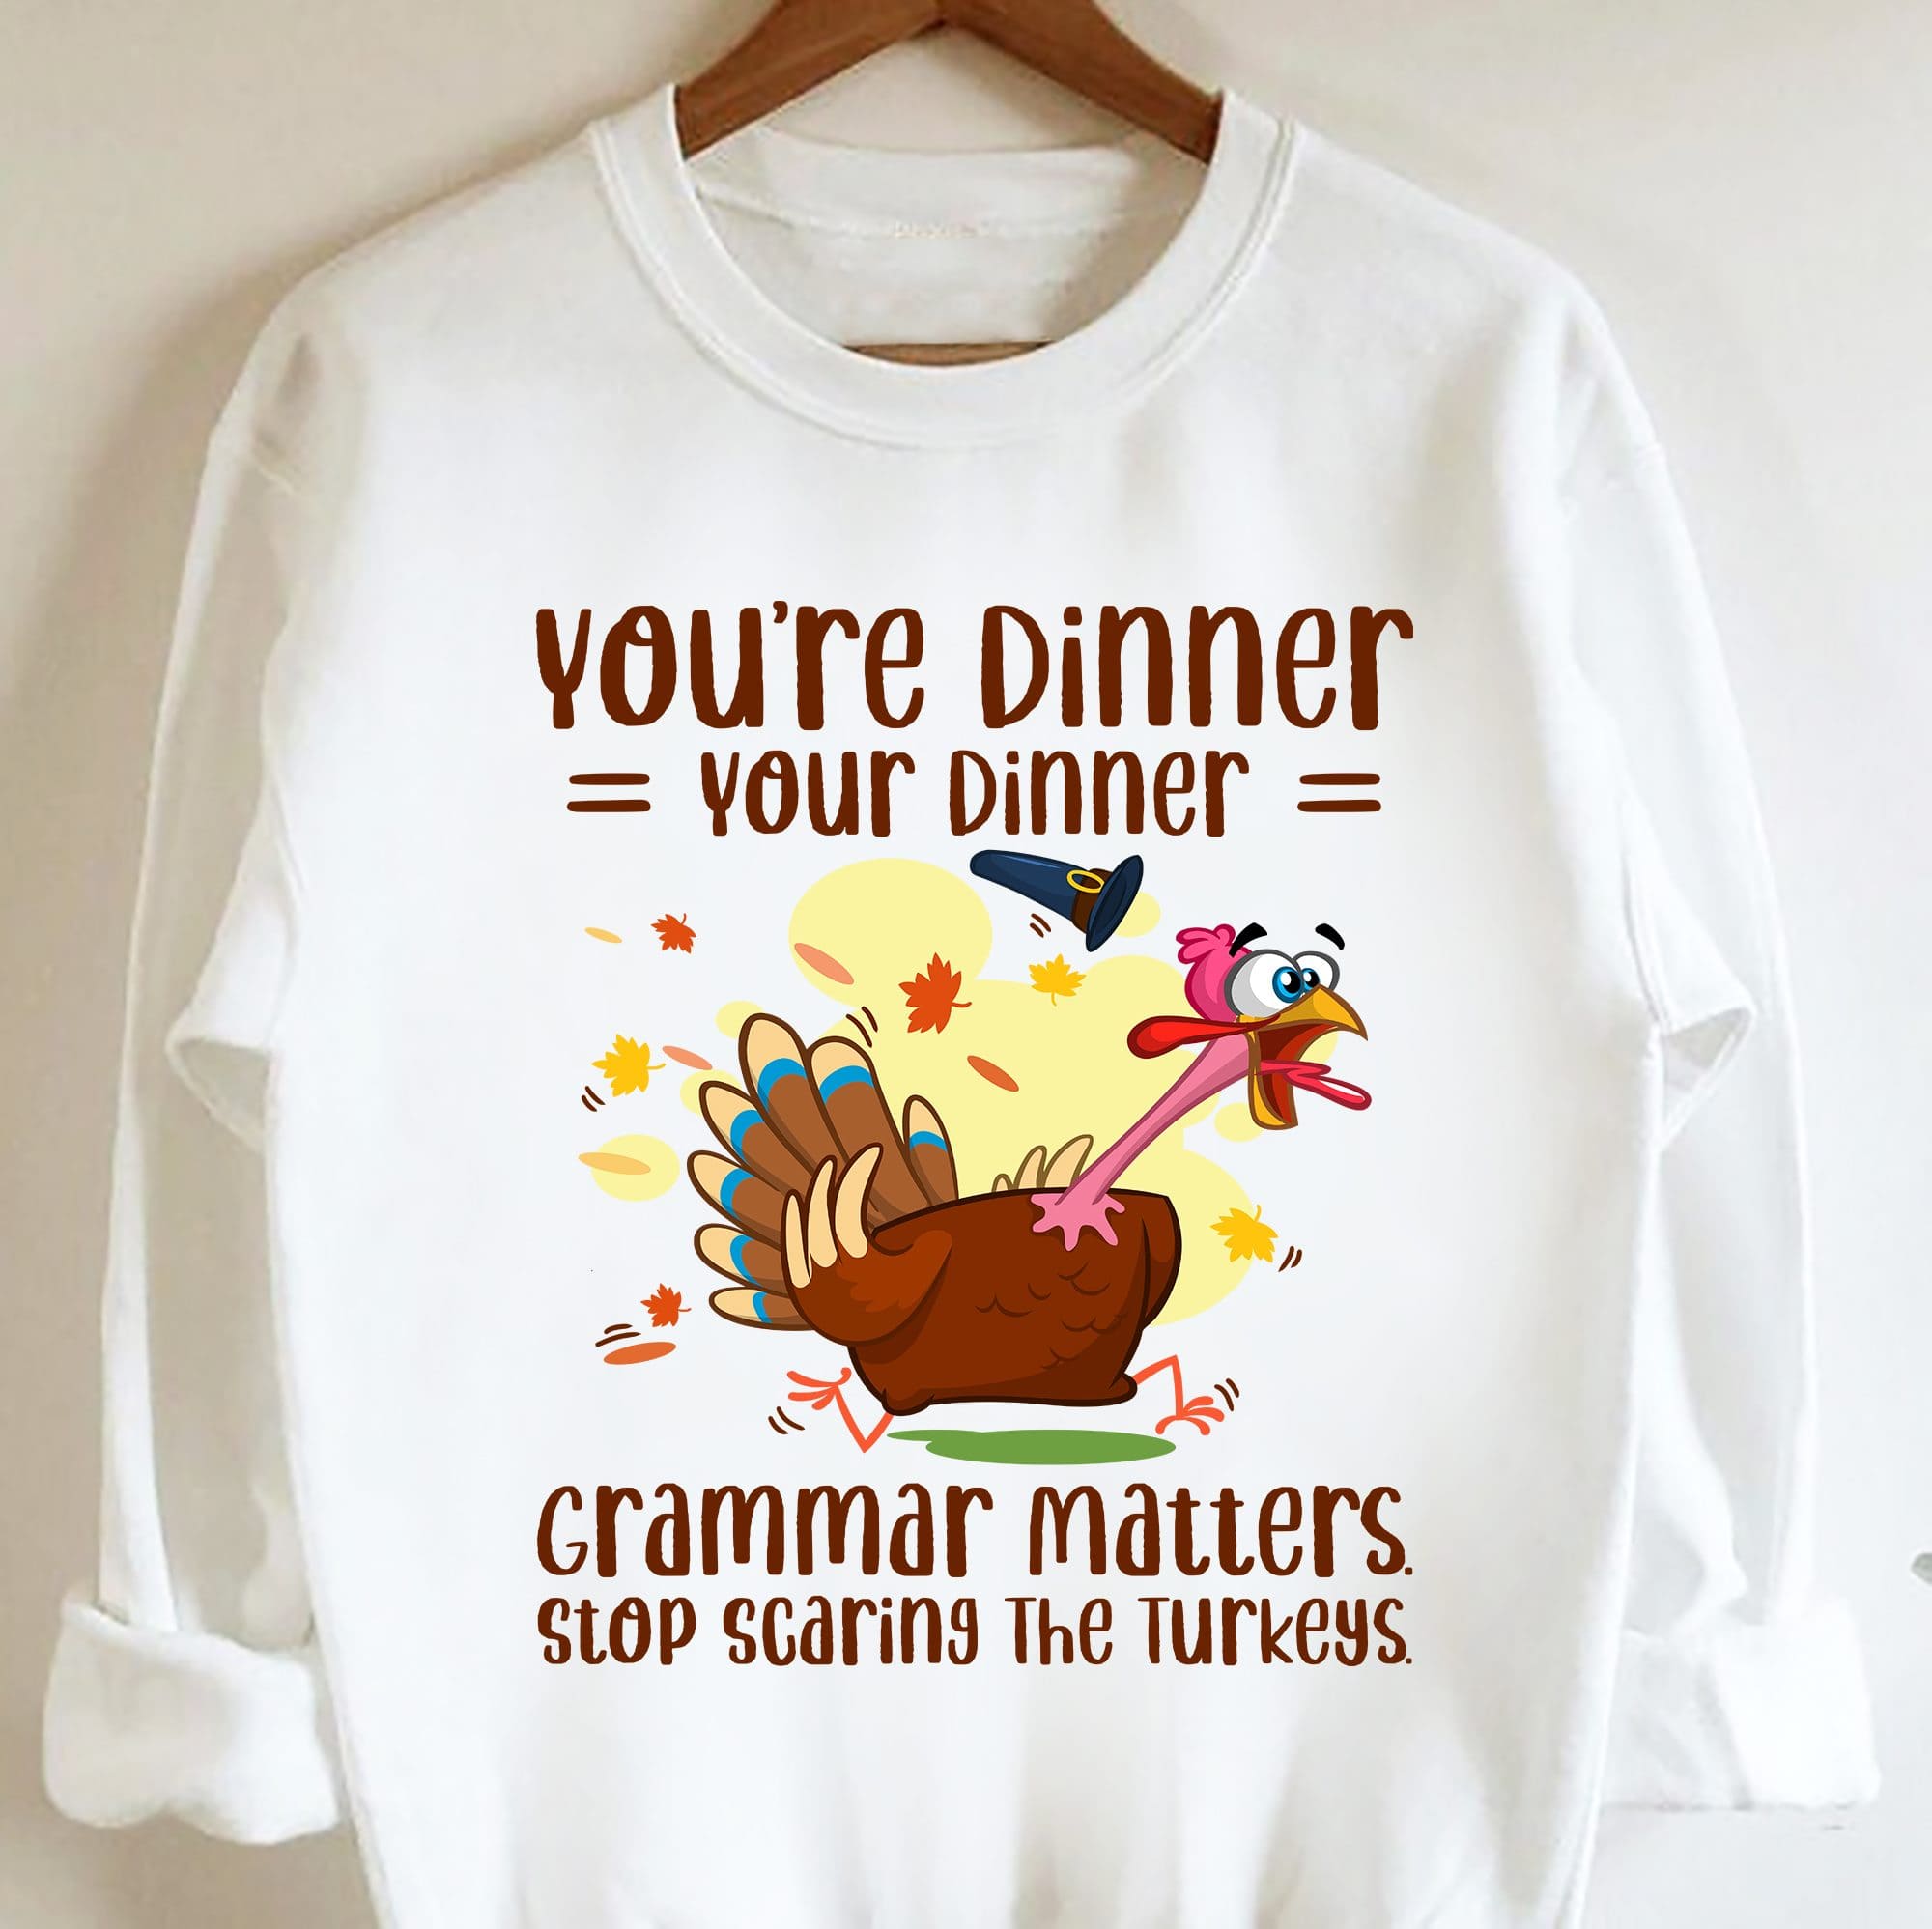 Funny Turkey Thanksgiving Gift - You're dinner your dinner grammar matters stop scaring the turkeys